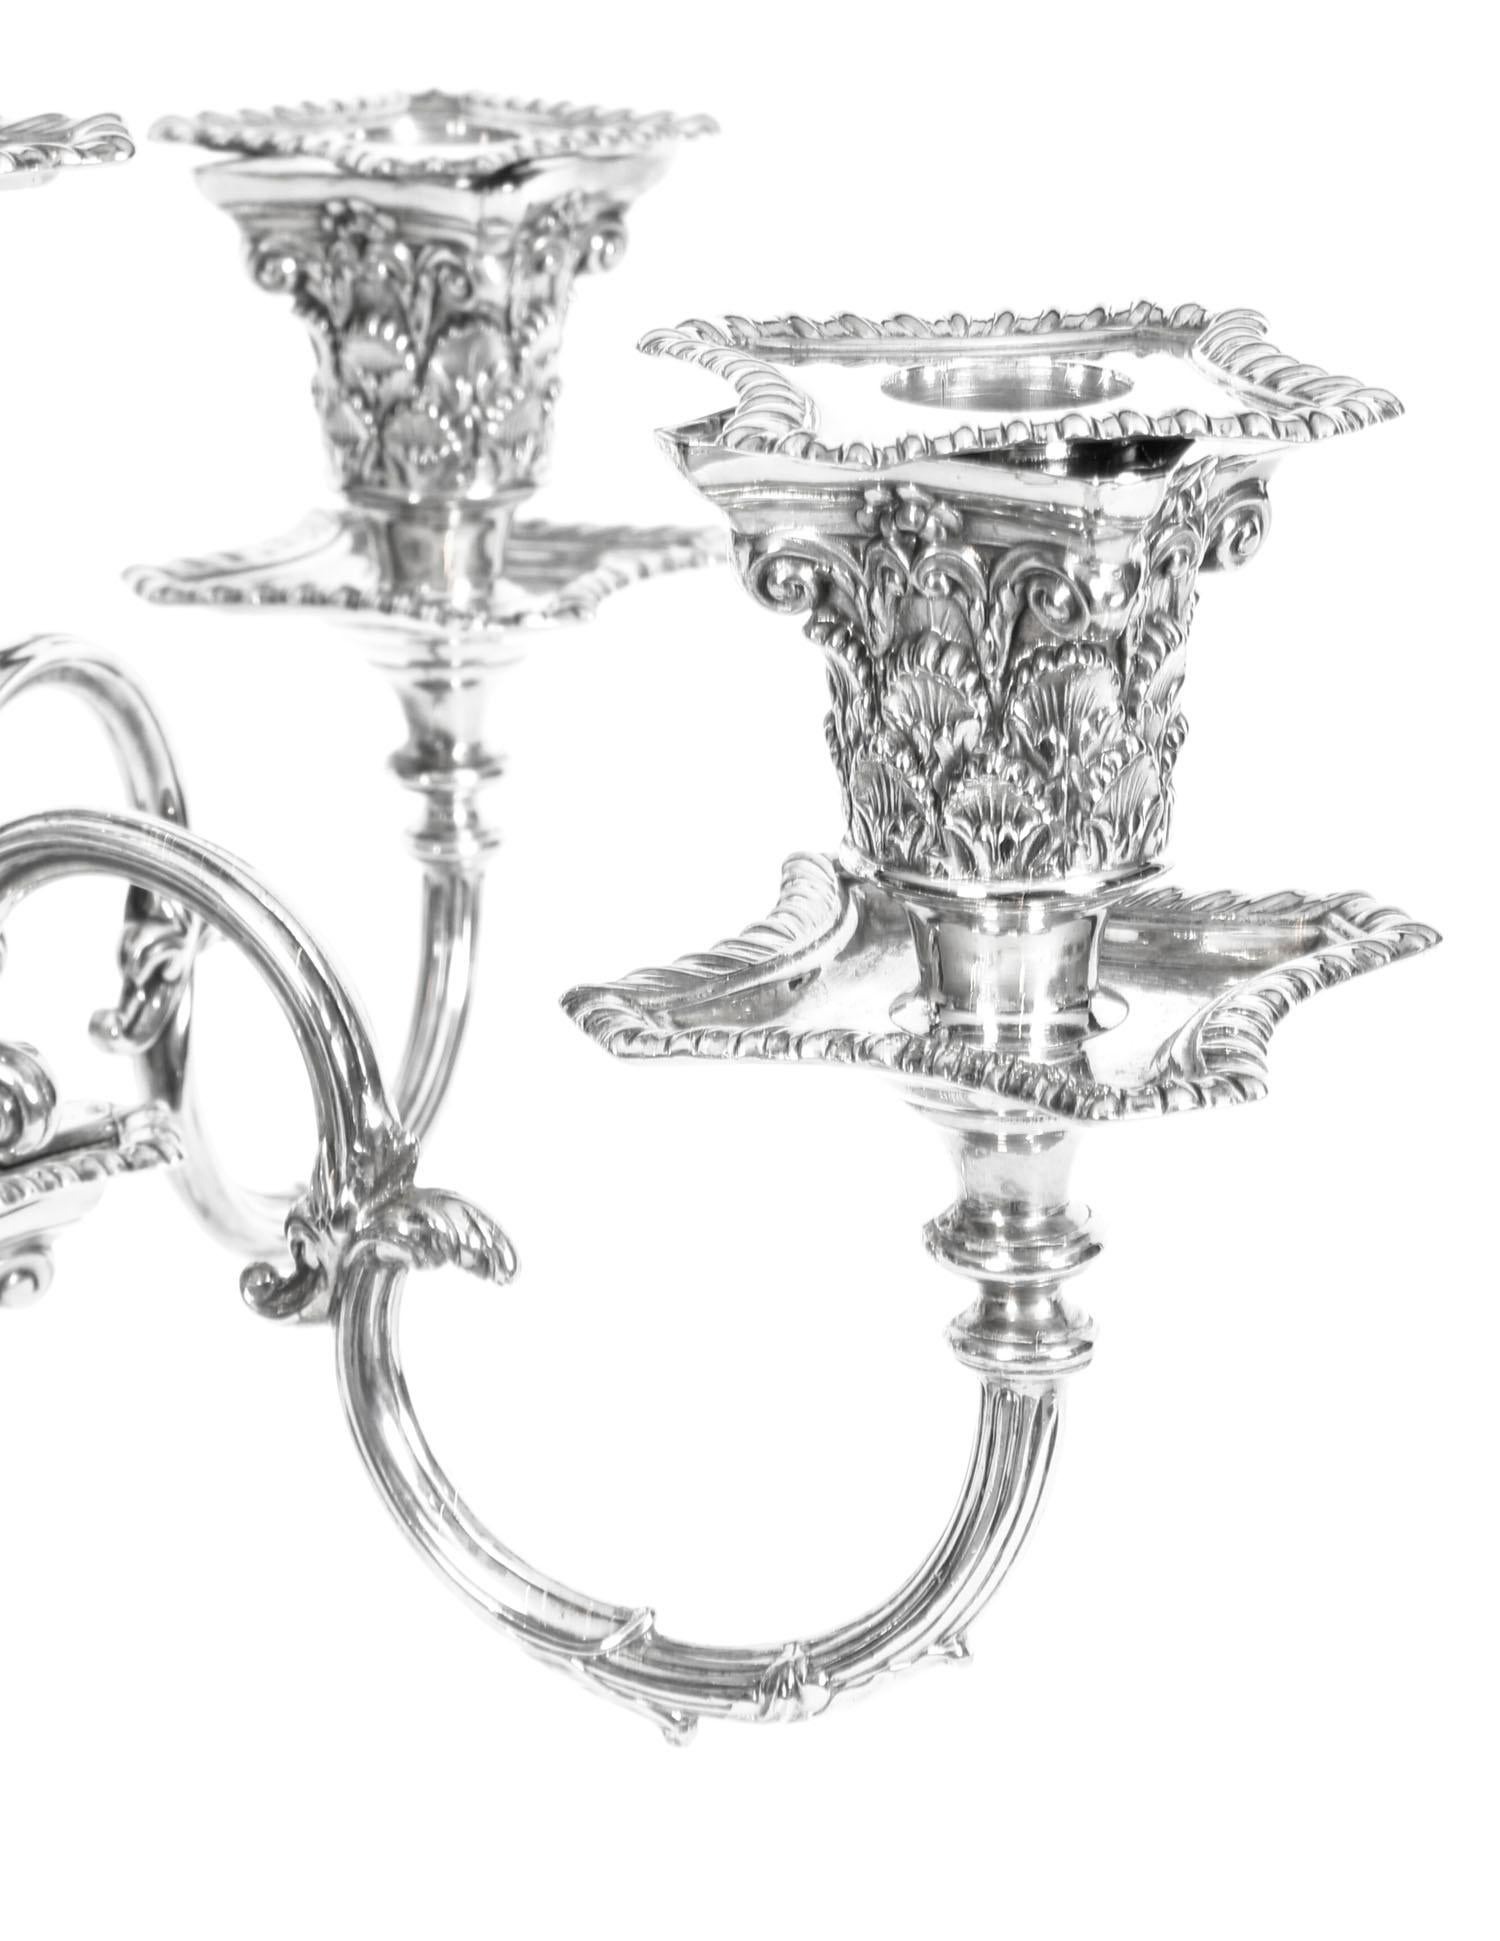 Late 19th Century Antique Pair of Five-Light Candelabra by Mappin & Webb, 19th Century